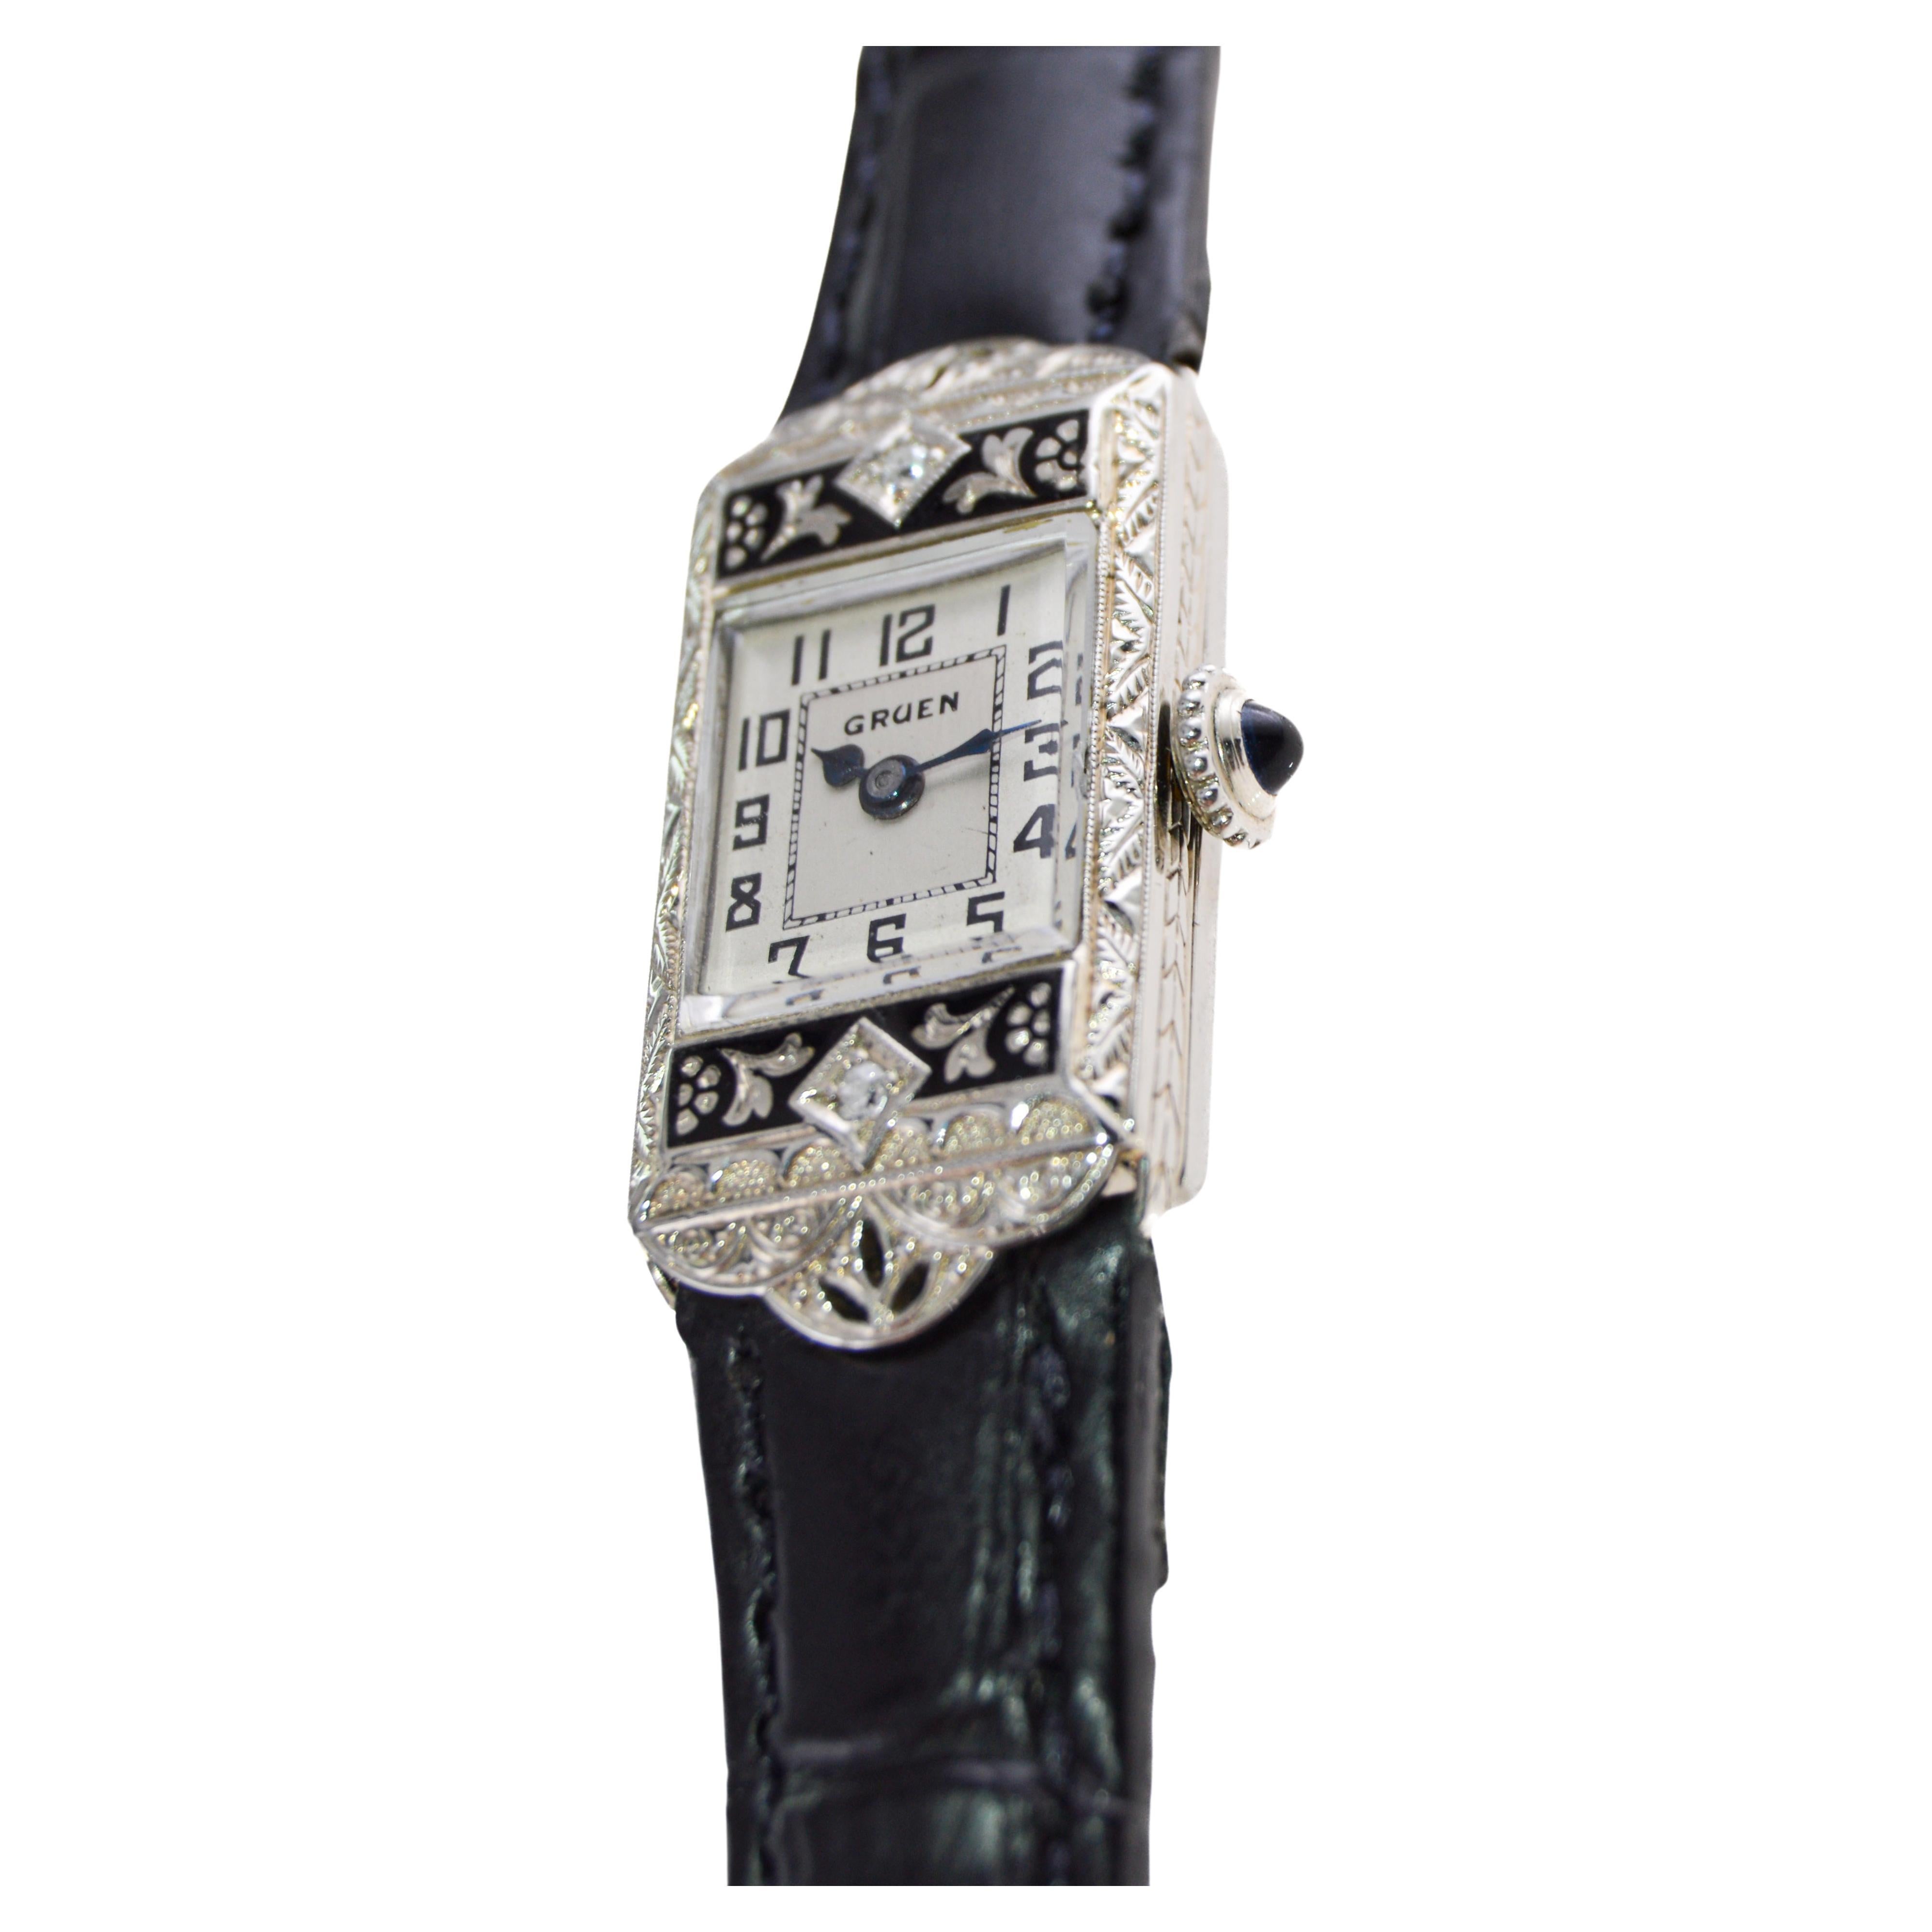 Gruen 14Kt Art Deco Ladies Watch with Original Dial and Kiln Fired Enamel Case  In Excellent Condition For Sale In Long Beach, CA